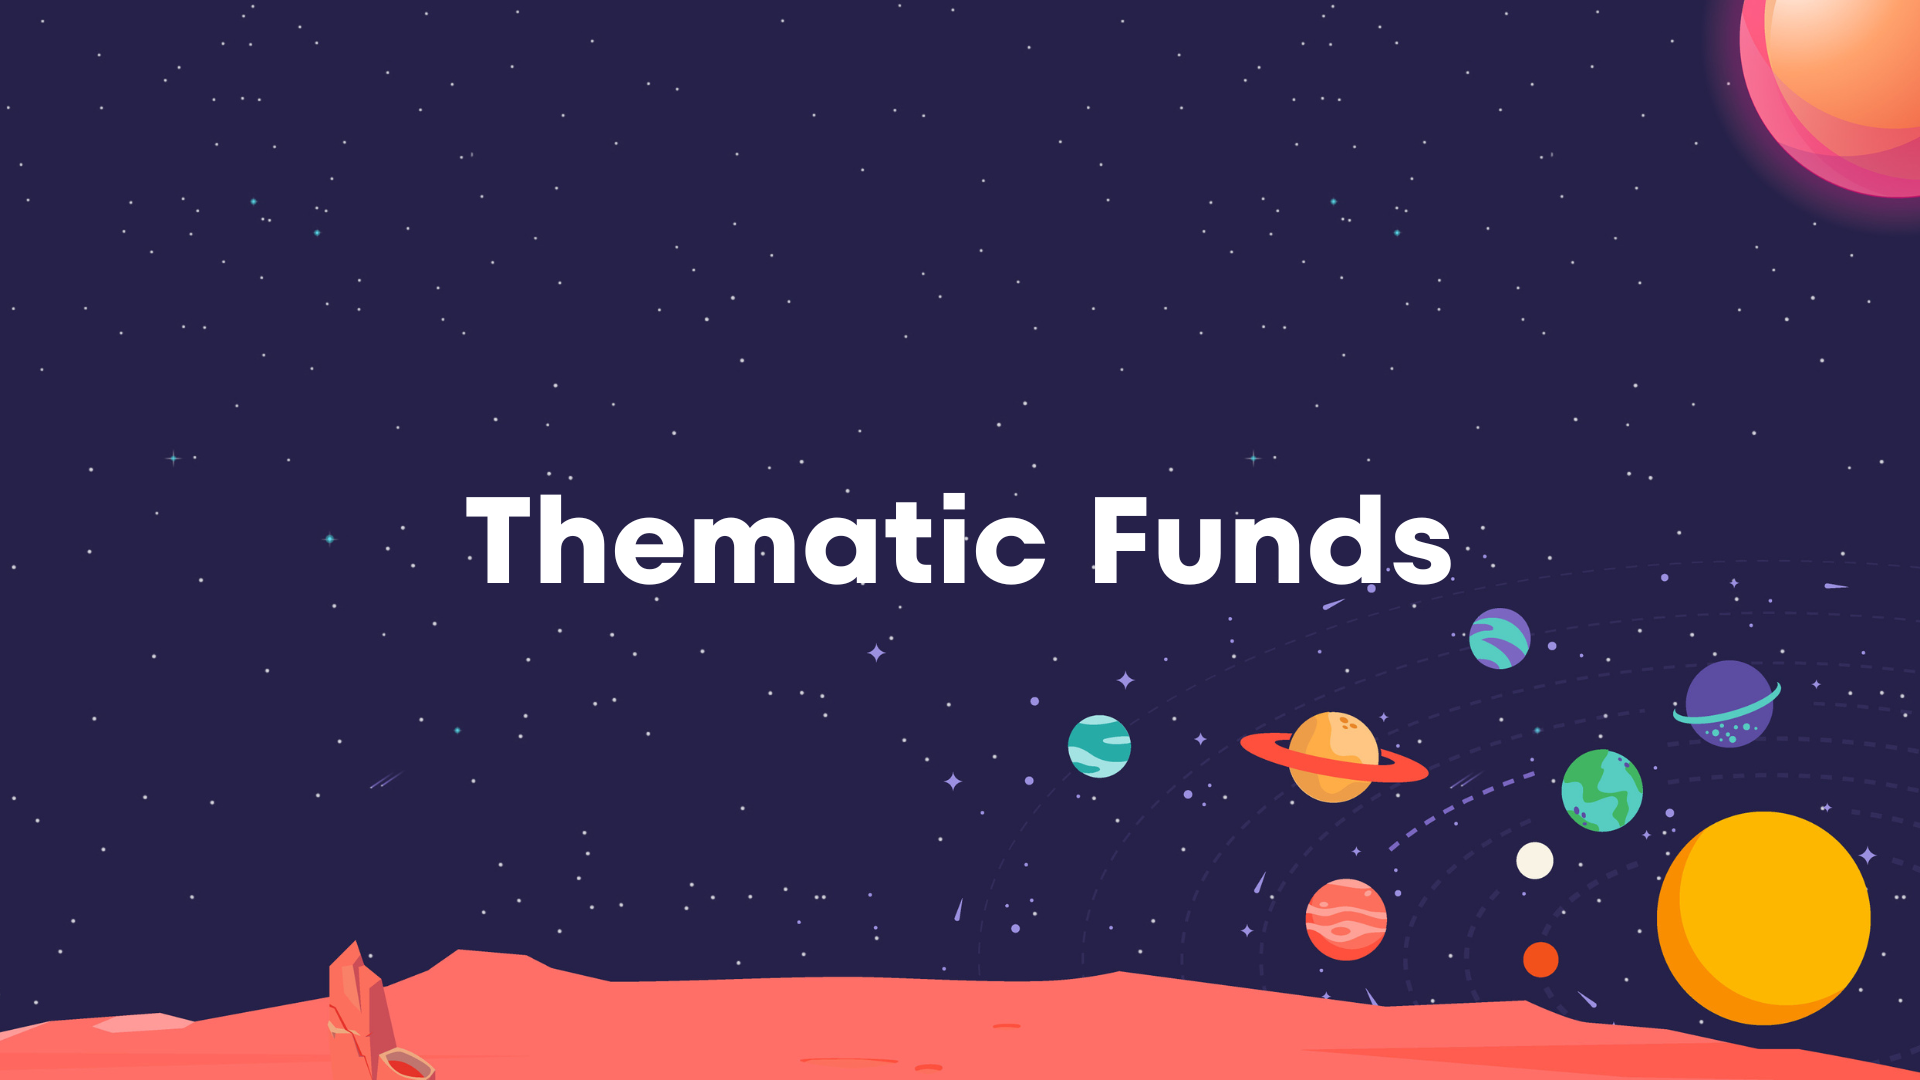 Thematic Funds - What Is It? Who Should Invest In It?